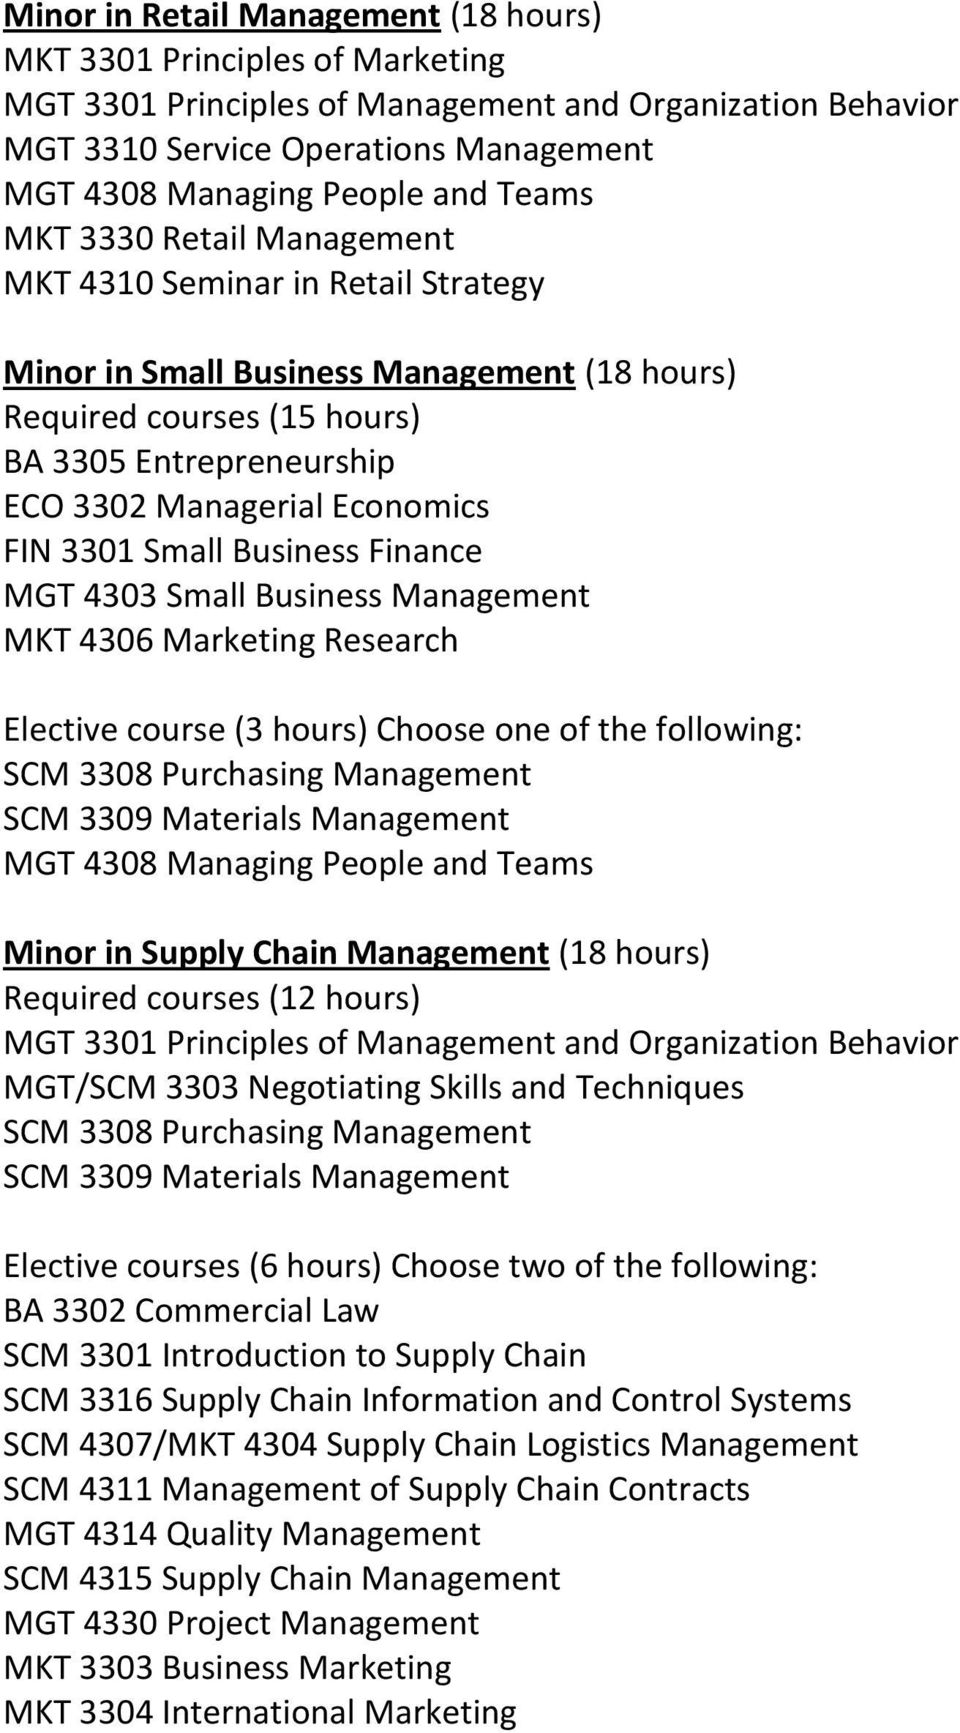 Choose one of the following: SCM 3308 Purchasing Management SCM 3309 Materials Management Minor in Supply Chain Management (18 hours) Required courses (12 hours) SCM 3308 Purchasing Management SCM